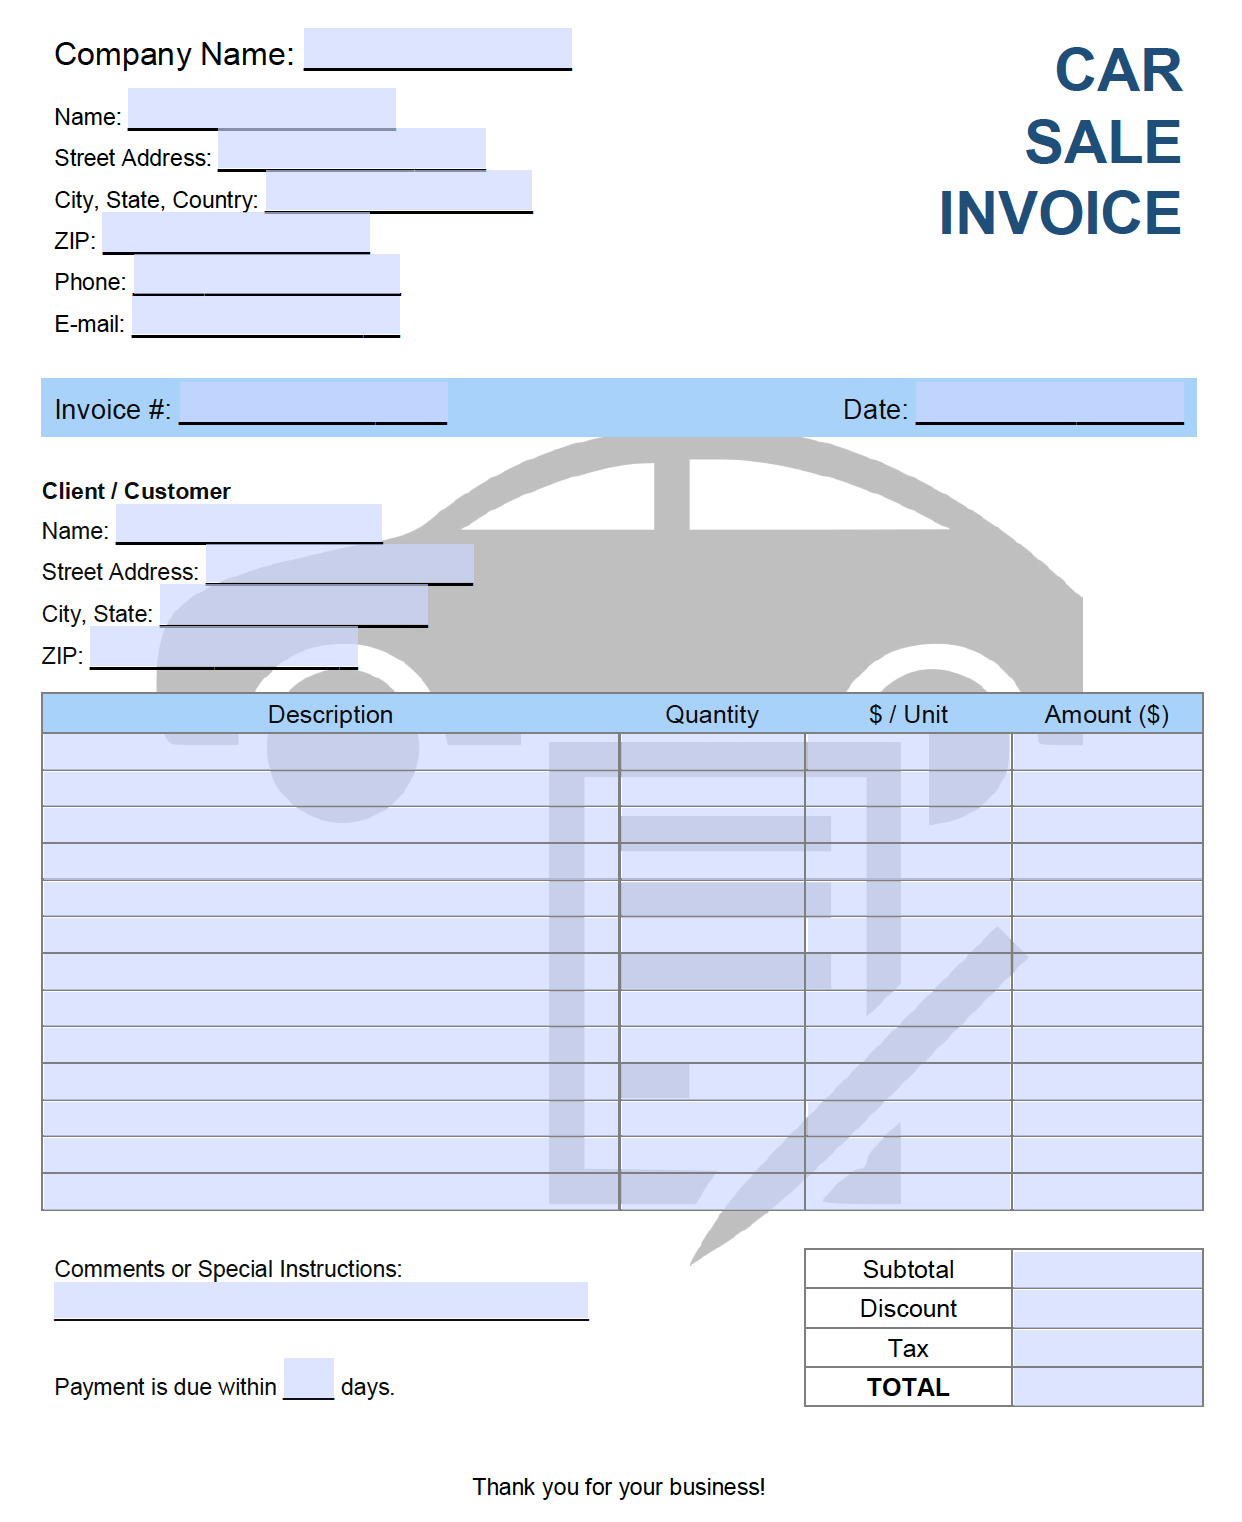 Free Car Sales Invoice Template  PDF  WORD  EXCEL With Regard To Car Sales Invoice Template Uk